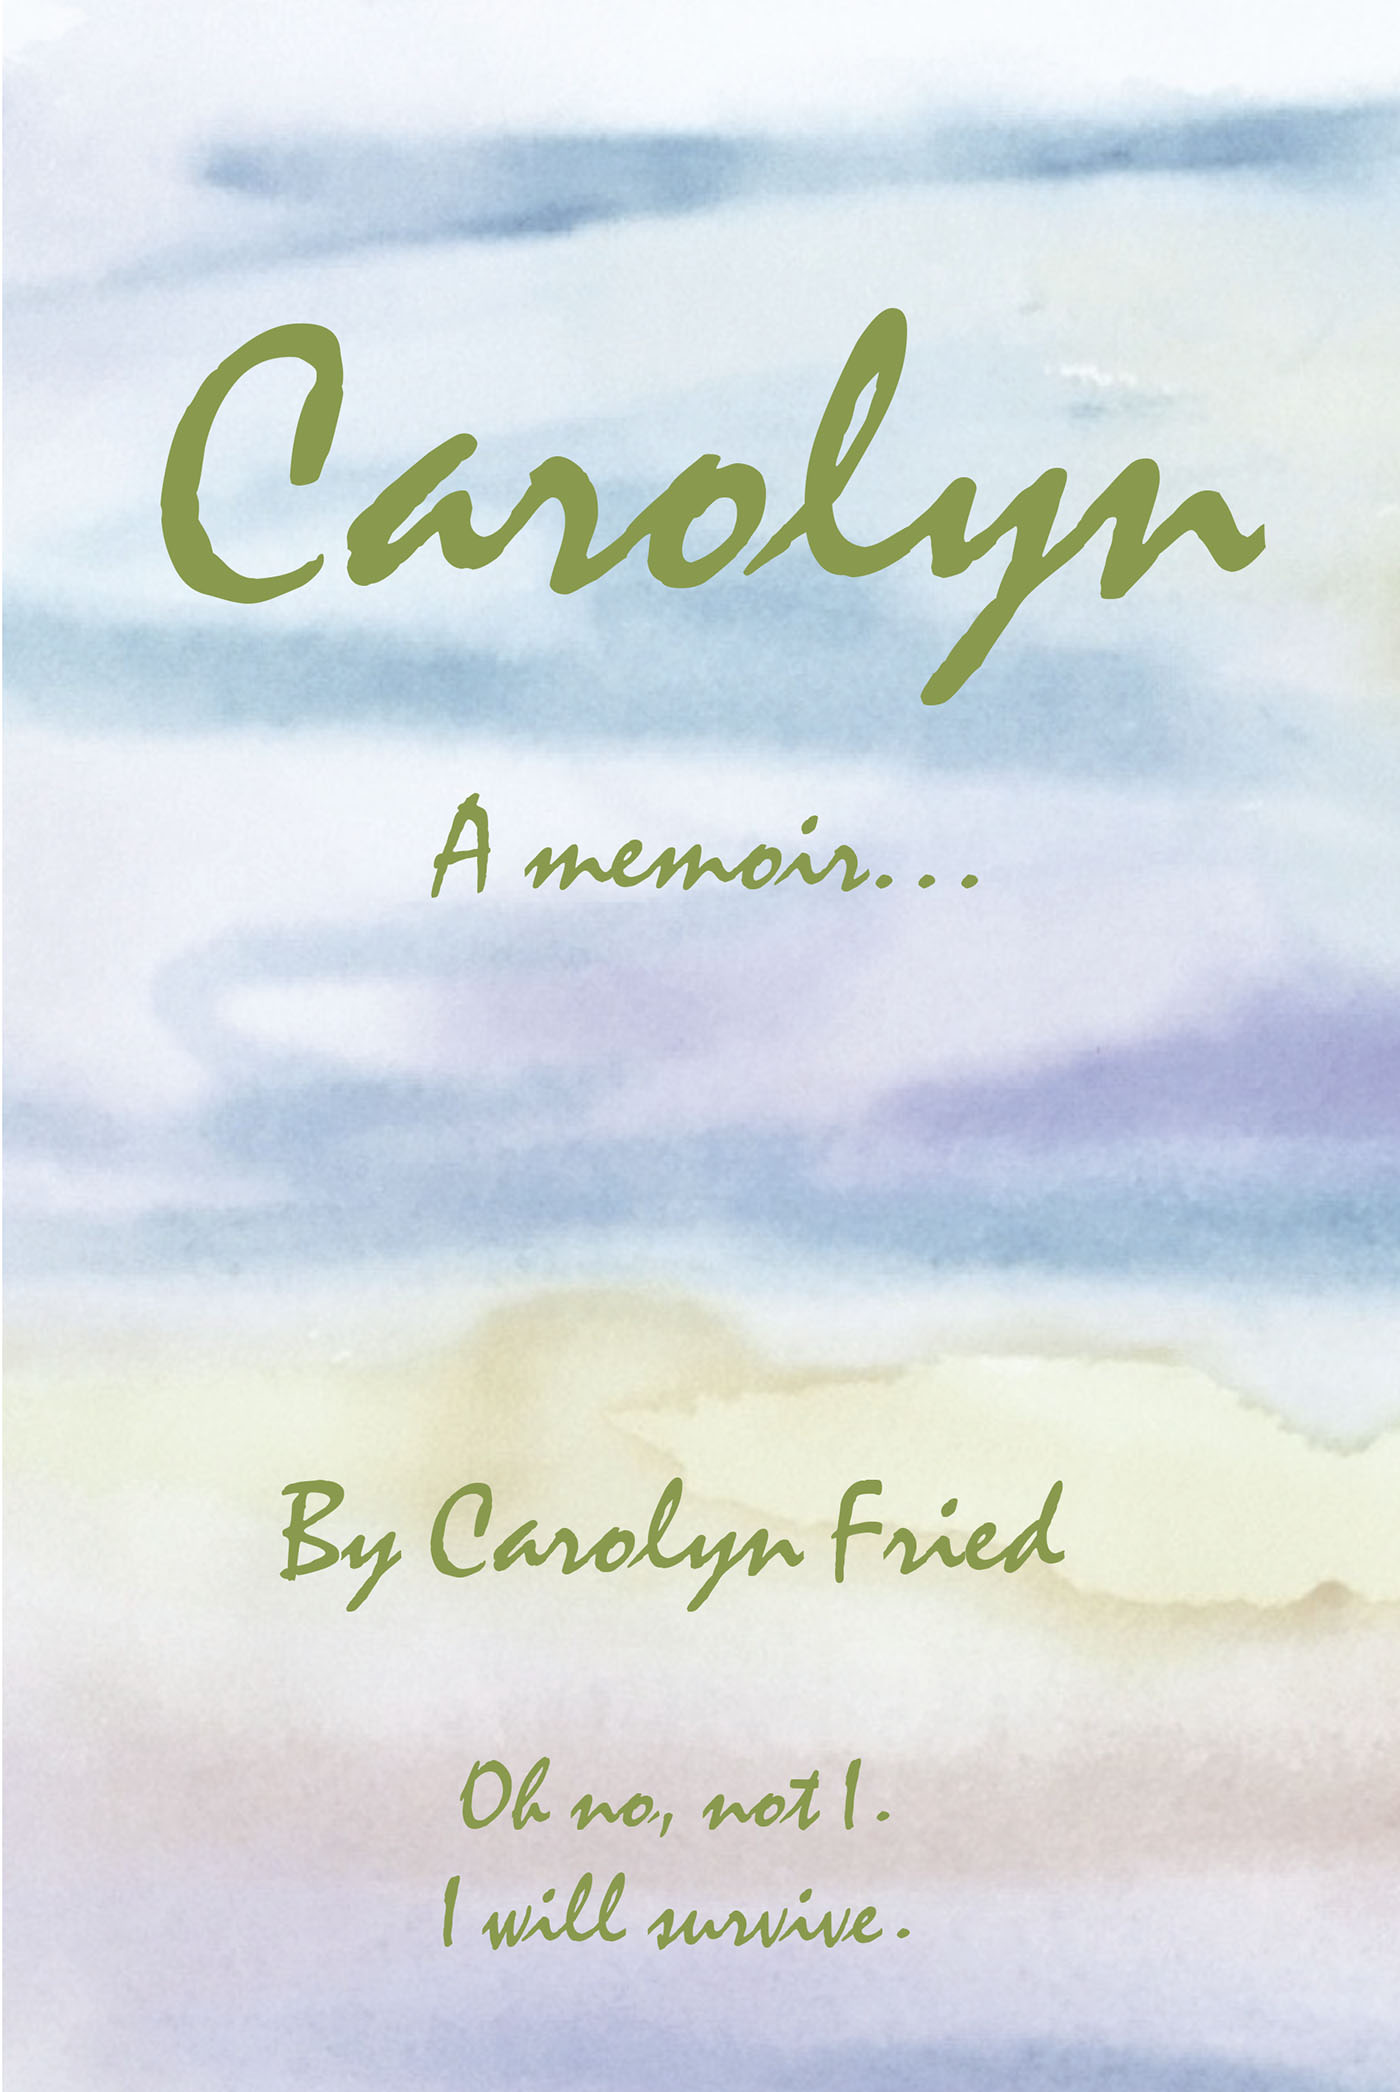 Carolyn Cover Image